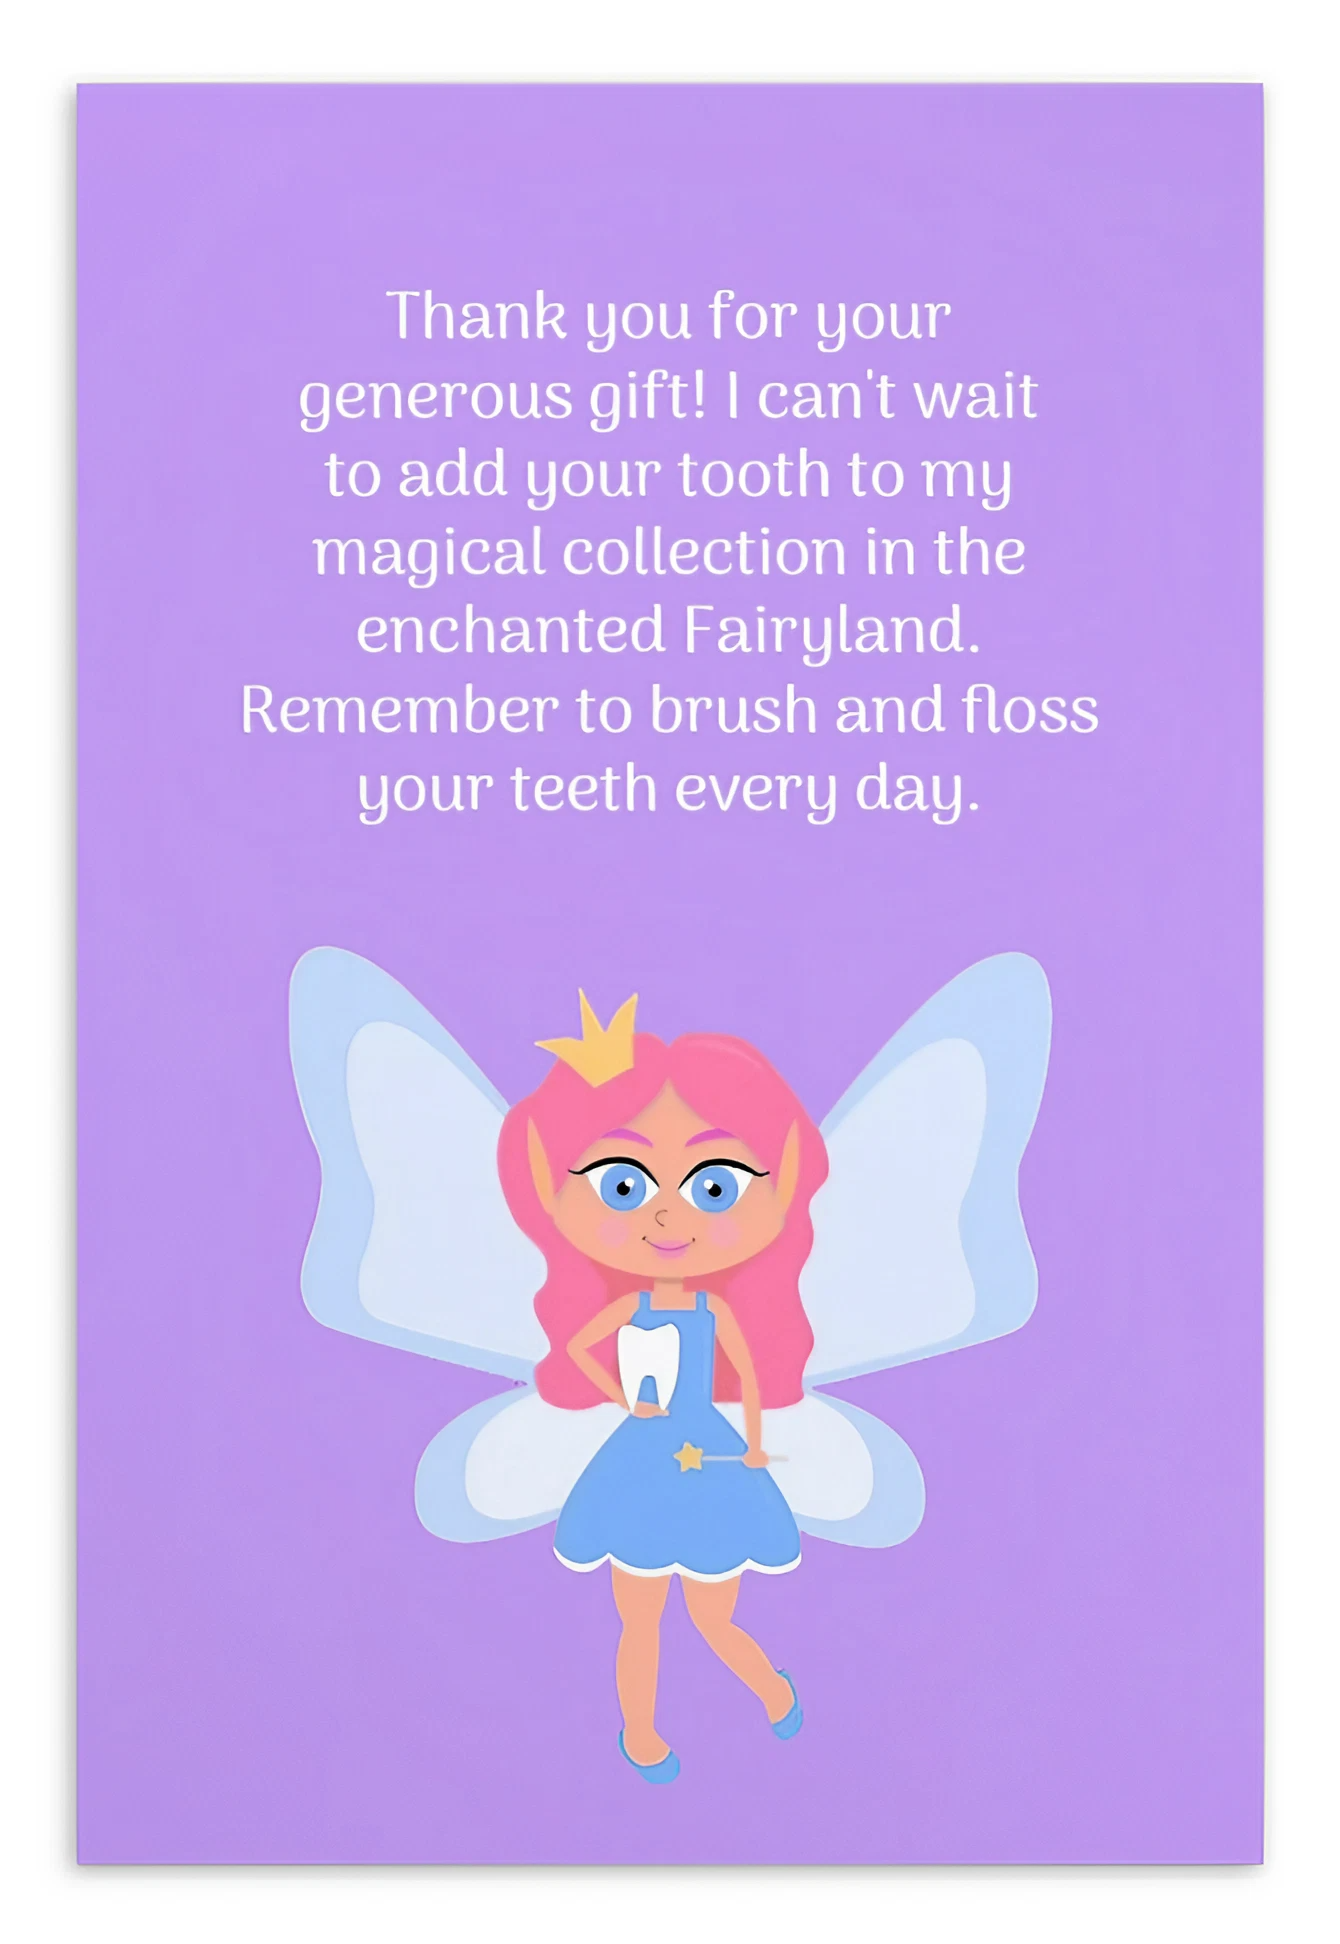 Tooth Fairy Thank You Cards- Thank You For Your Generous Gift!